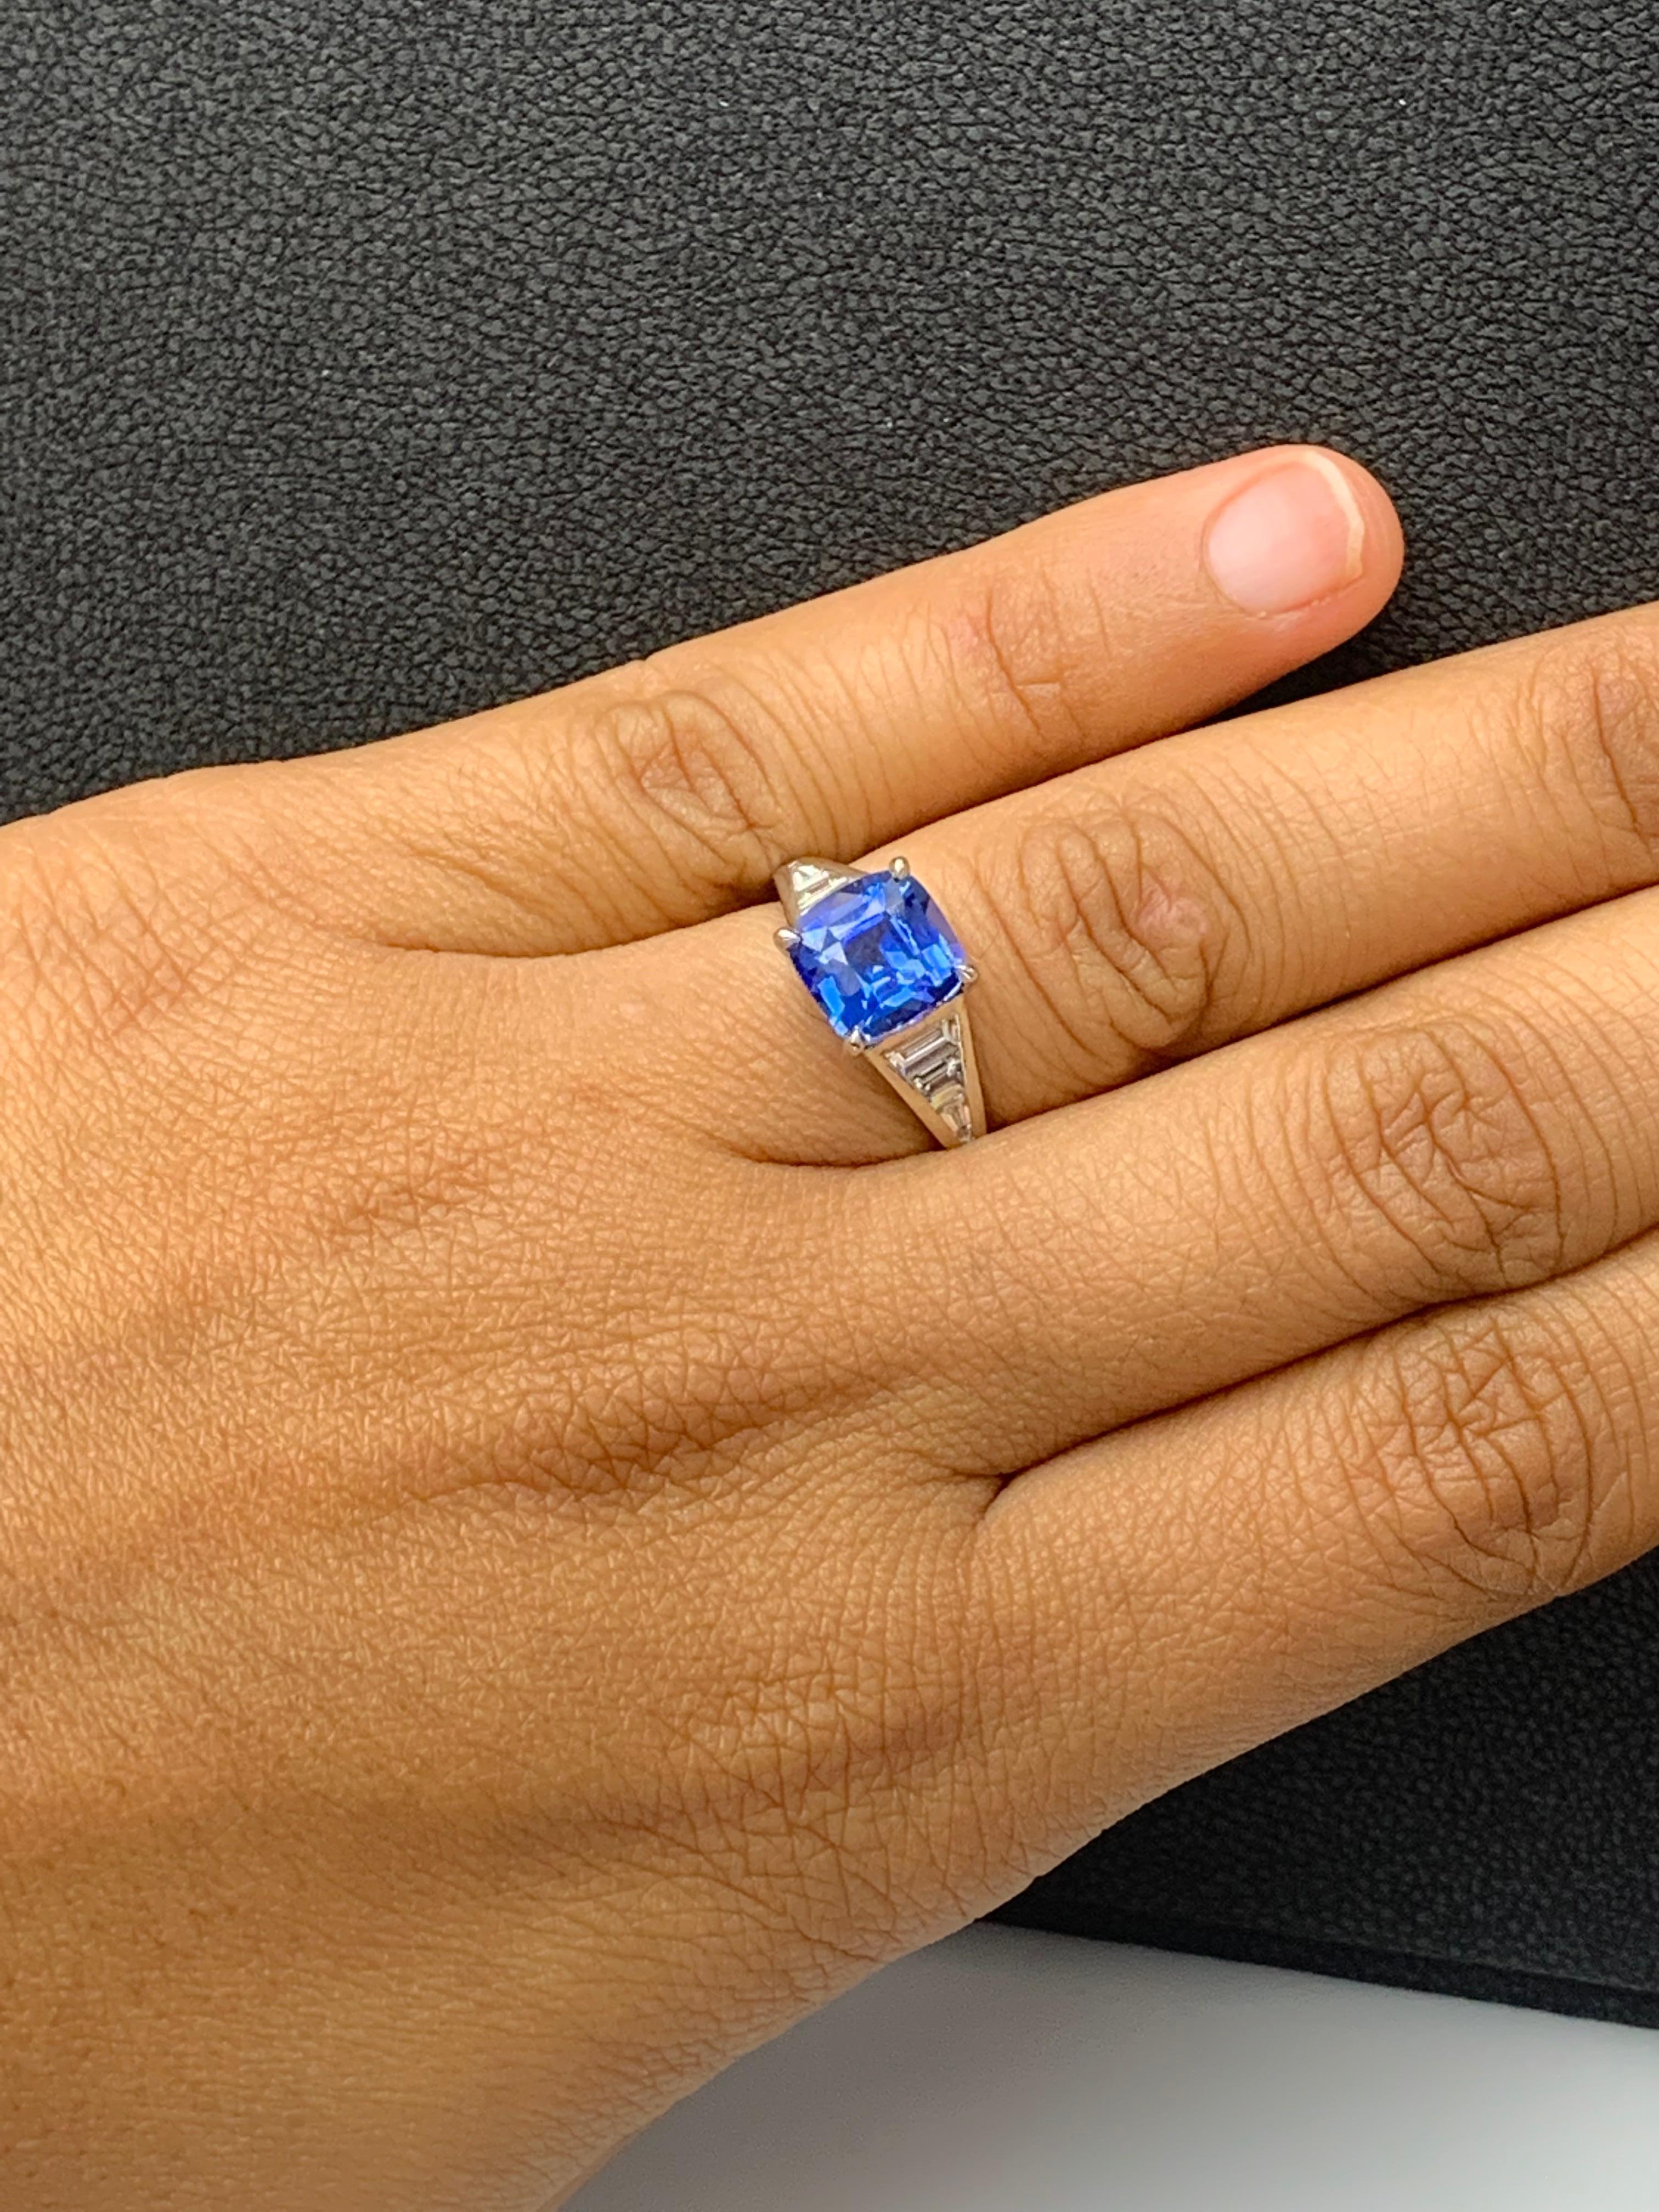 3.39 Carat Cushion Cut Blue Sapphire and Diamond Engagement Ring in Platinum For Sale 3